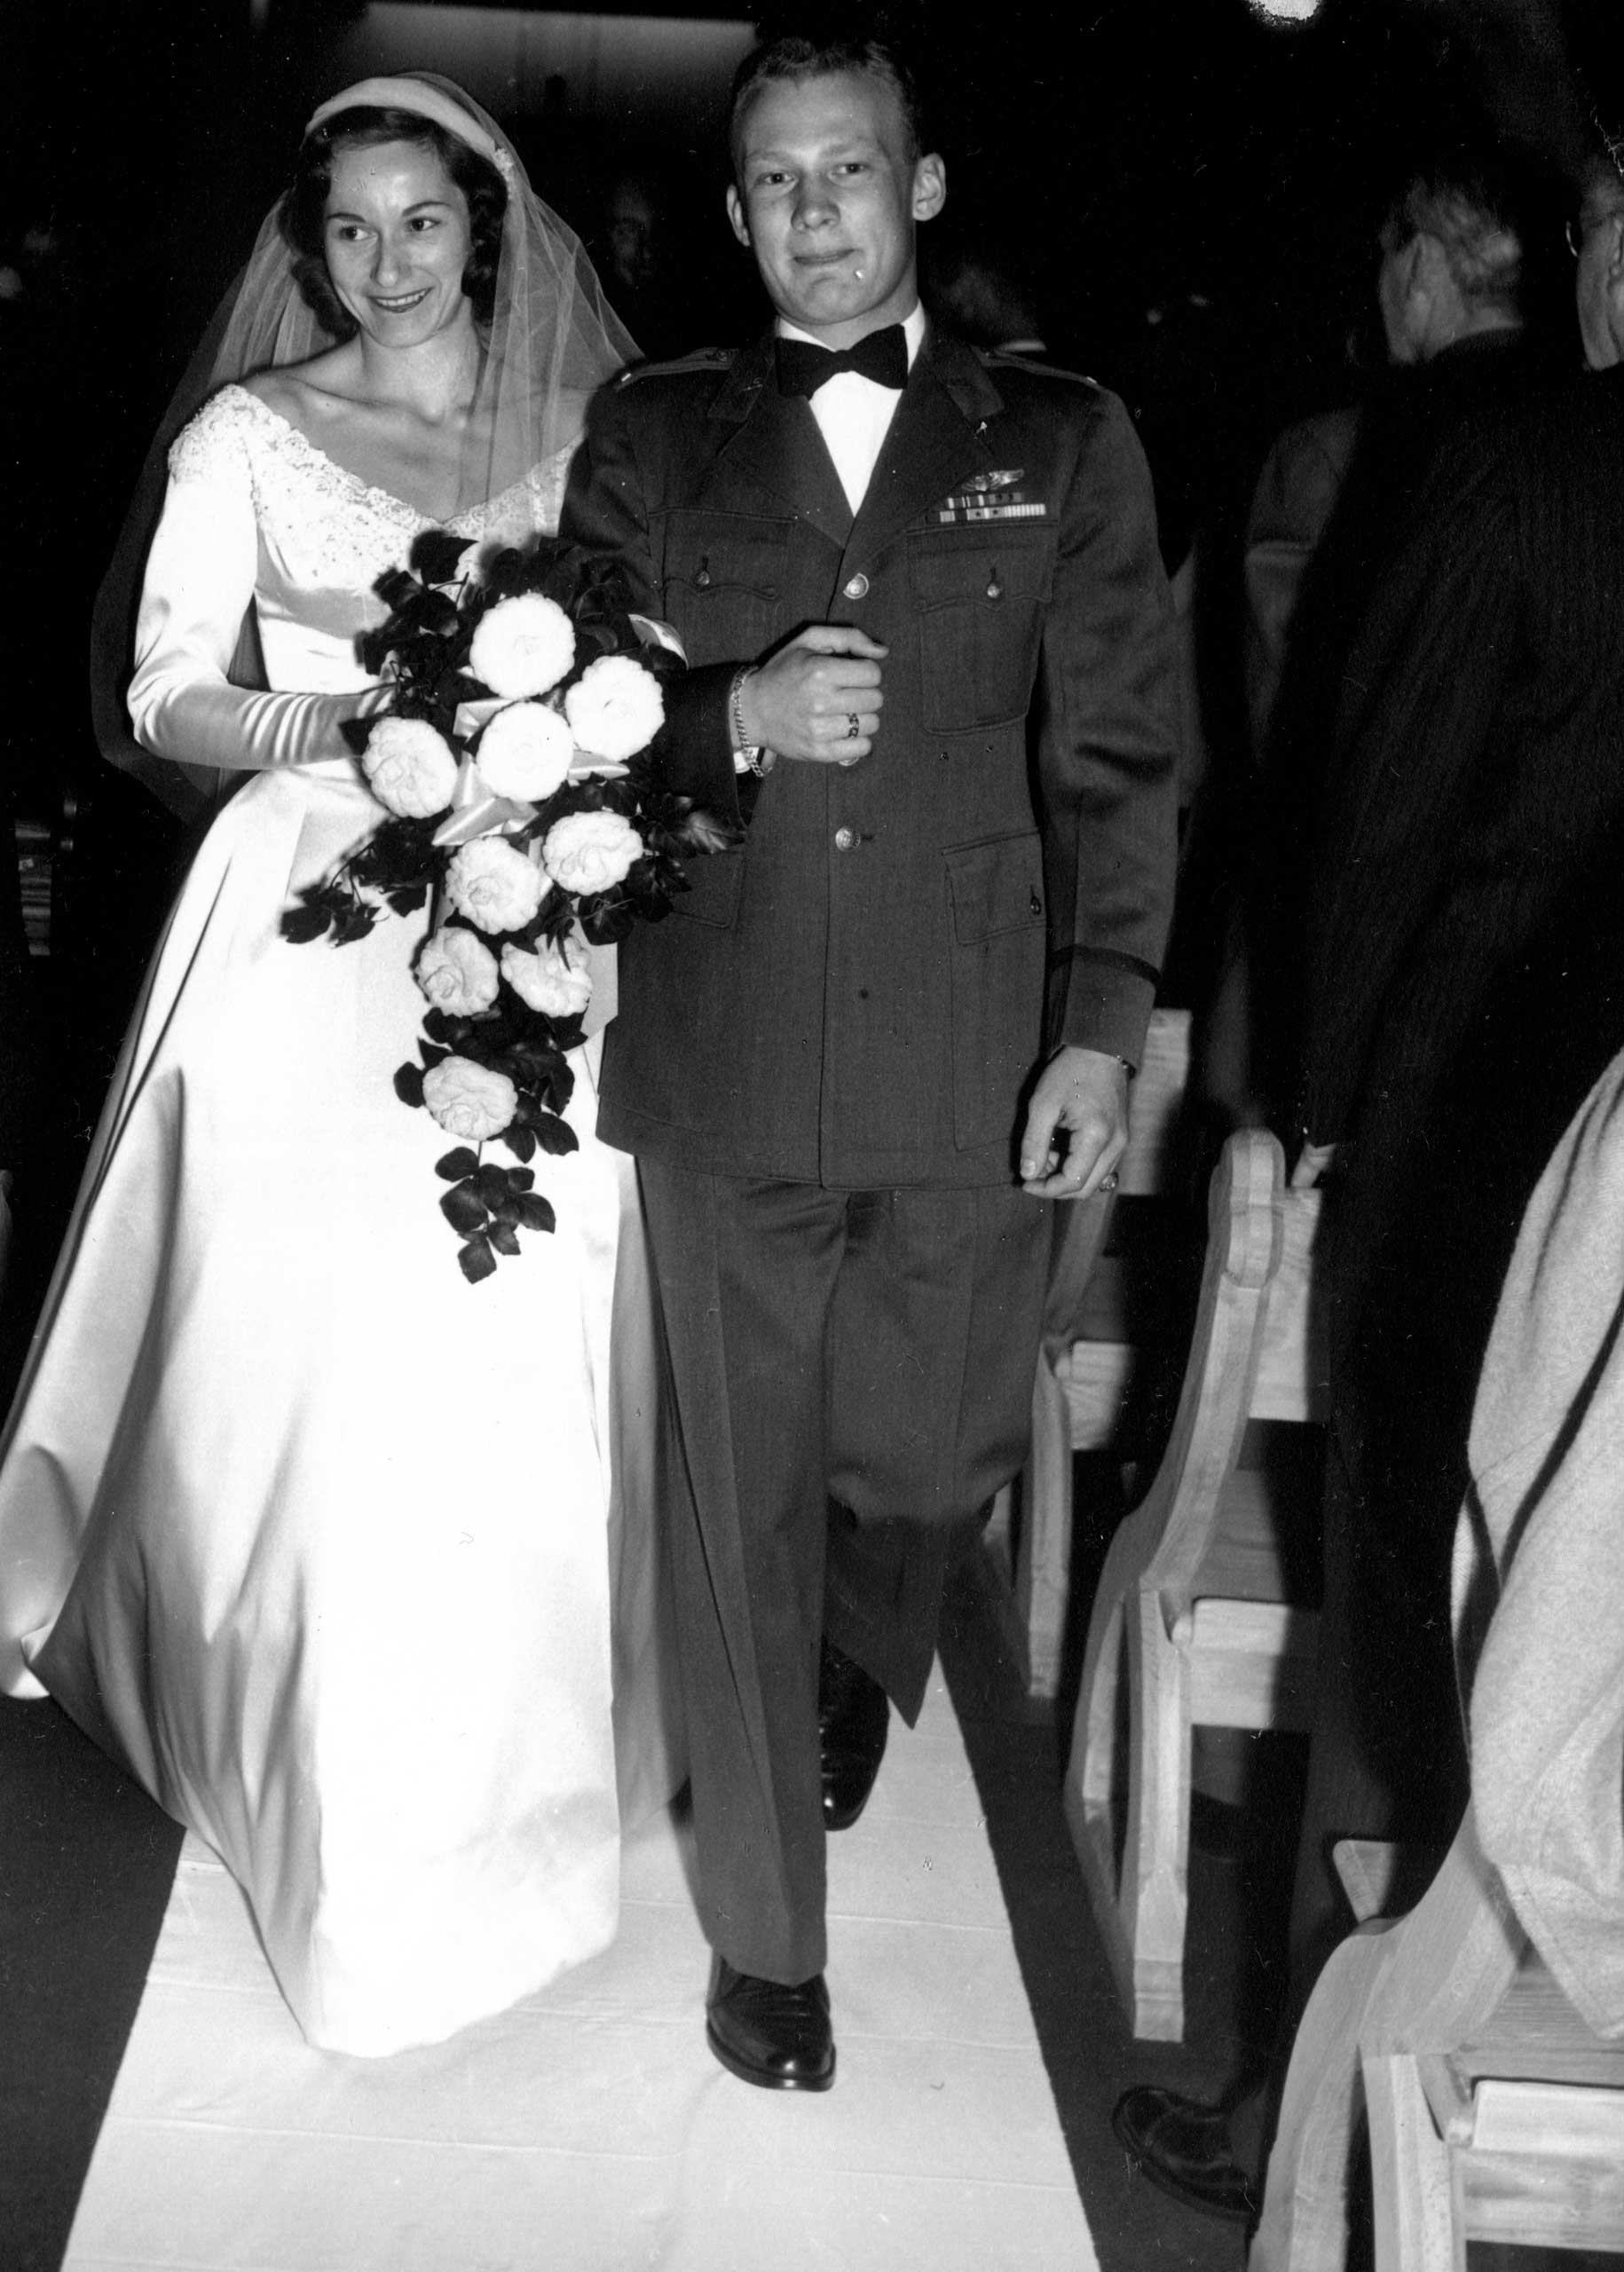 The first Aldrin nuptials wouldn't be the last. Aldrin married Joan Archer on Dec. 29, 1954. He would go on to marry two more times, to Beverly Van Zile in 1975 and Lois Driggs Cannon in 1988.